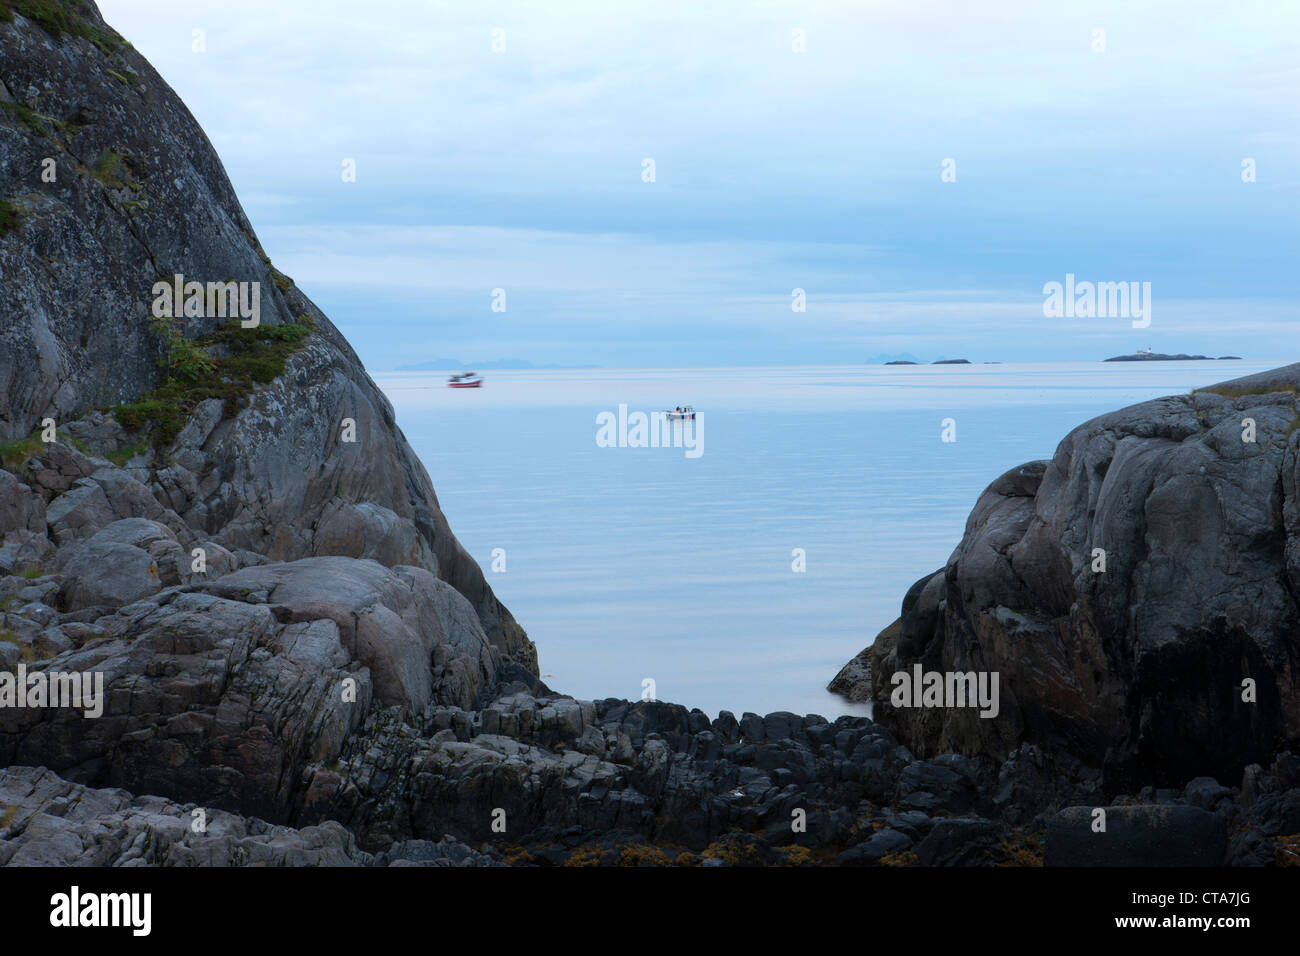 View towards the sea with fishing boats and rocky landscape in the morning light, Austvagoy, Lofoten, Nordland, Norway, Scandina Stock Photo